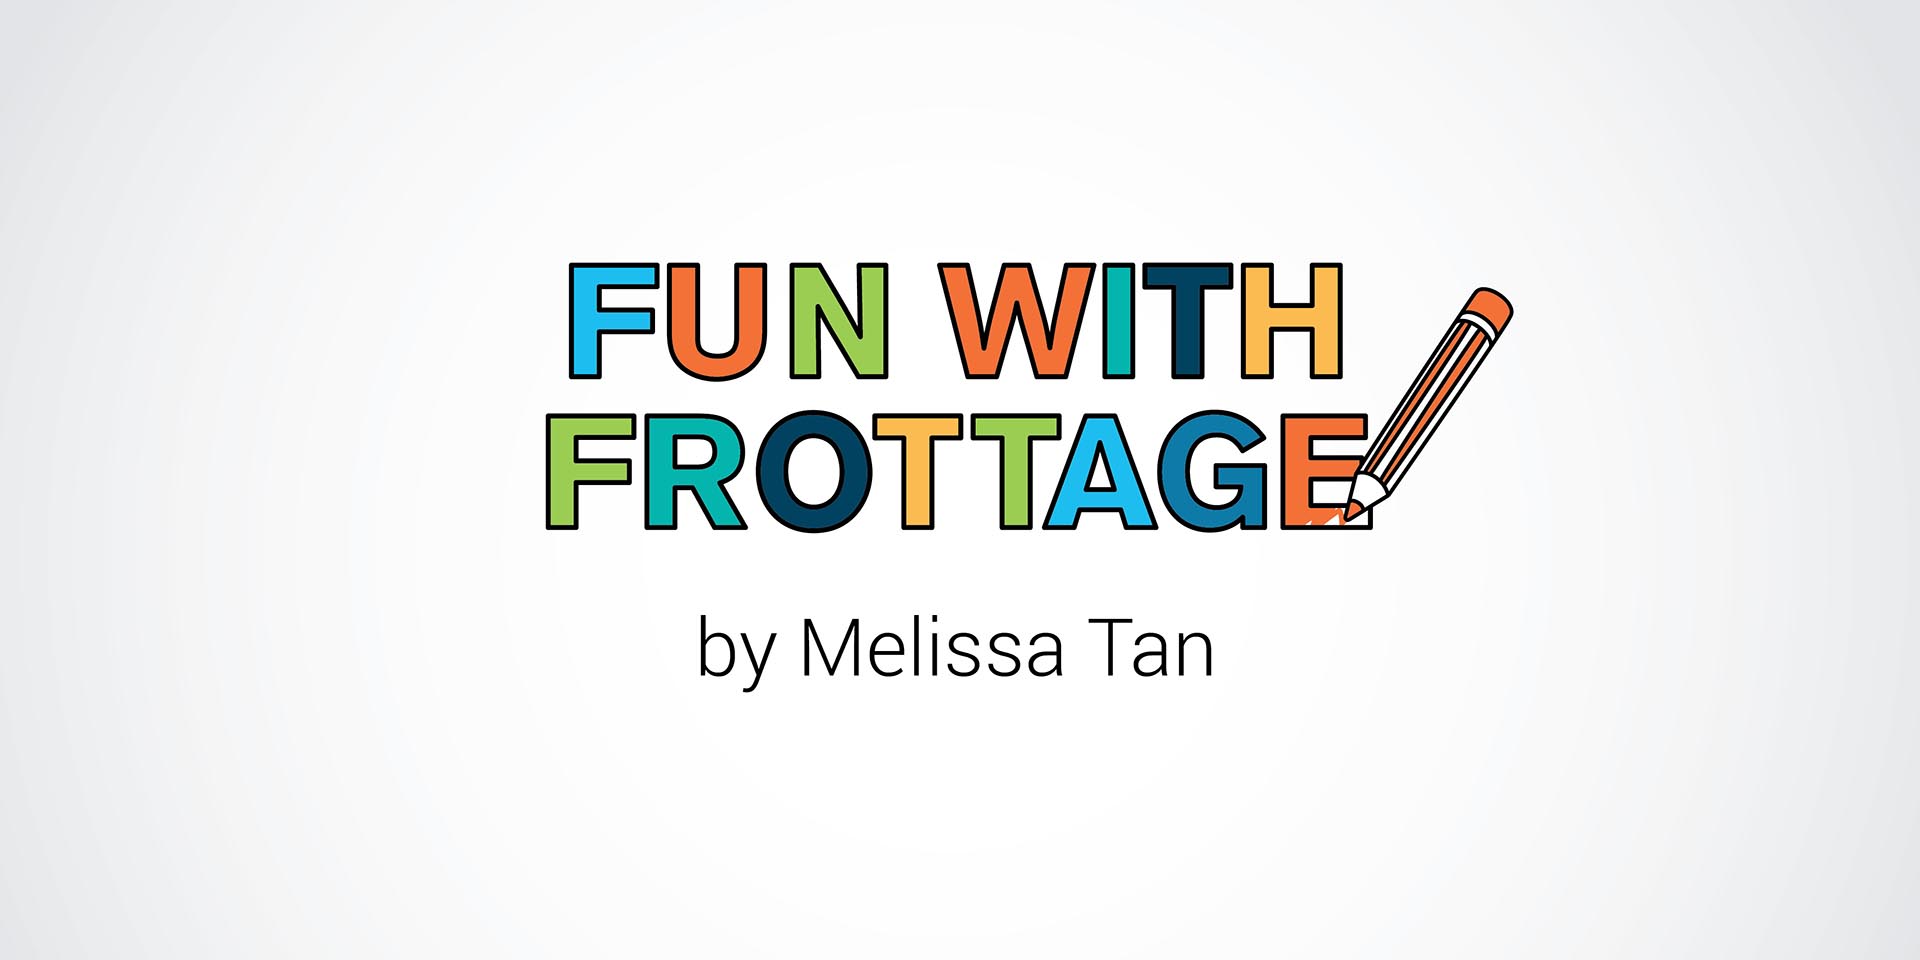 Artist in Action: Fun with Frottage by Melissa Tan